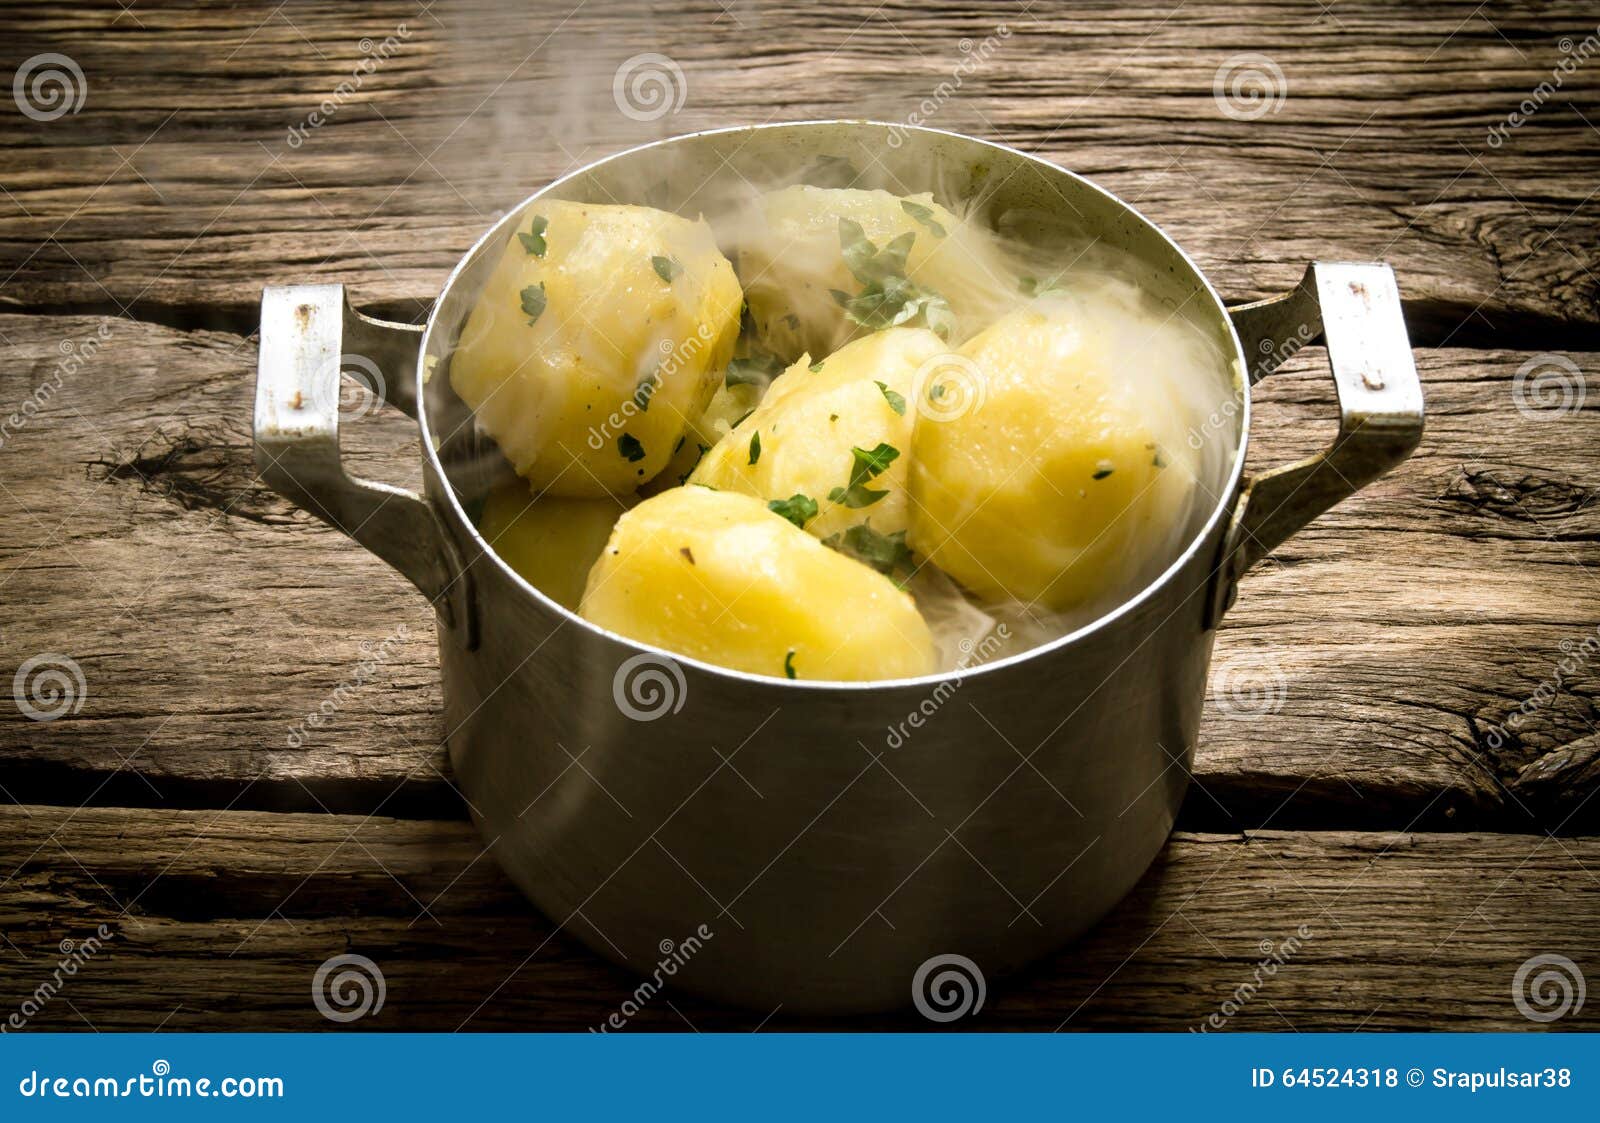 Do you steam or boil potatoes